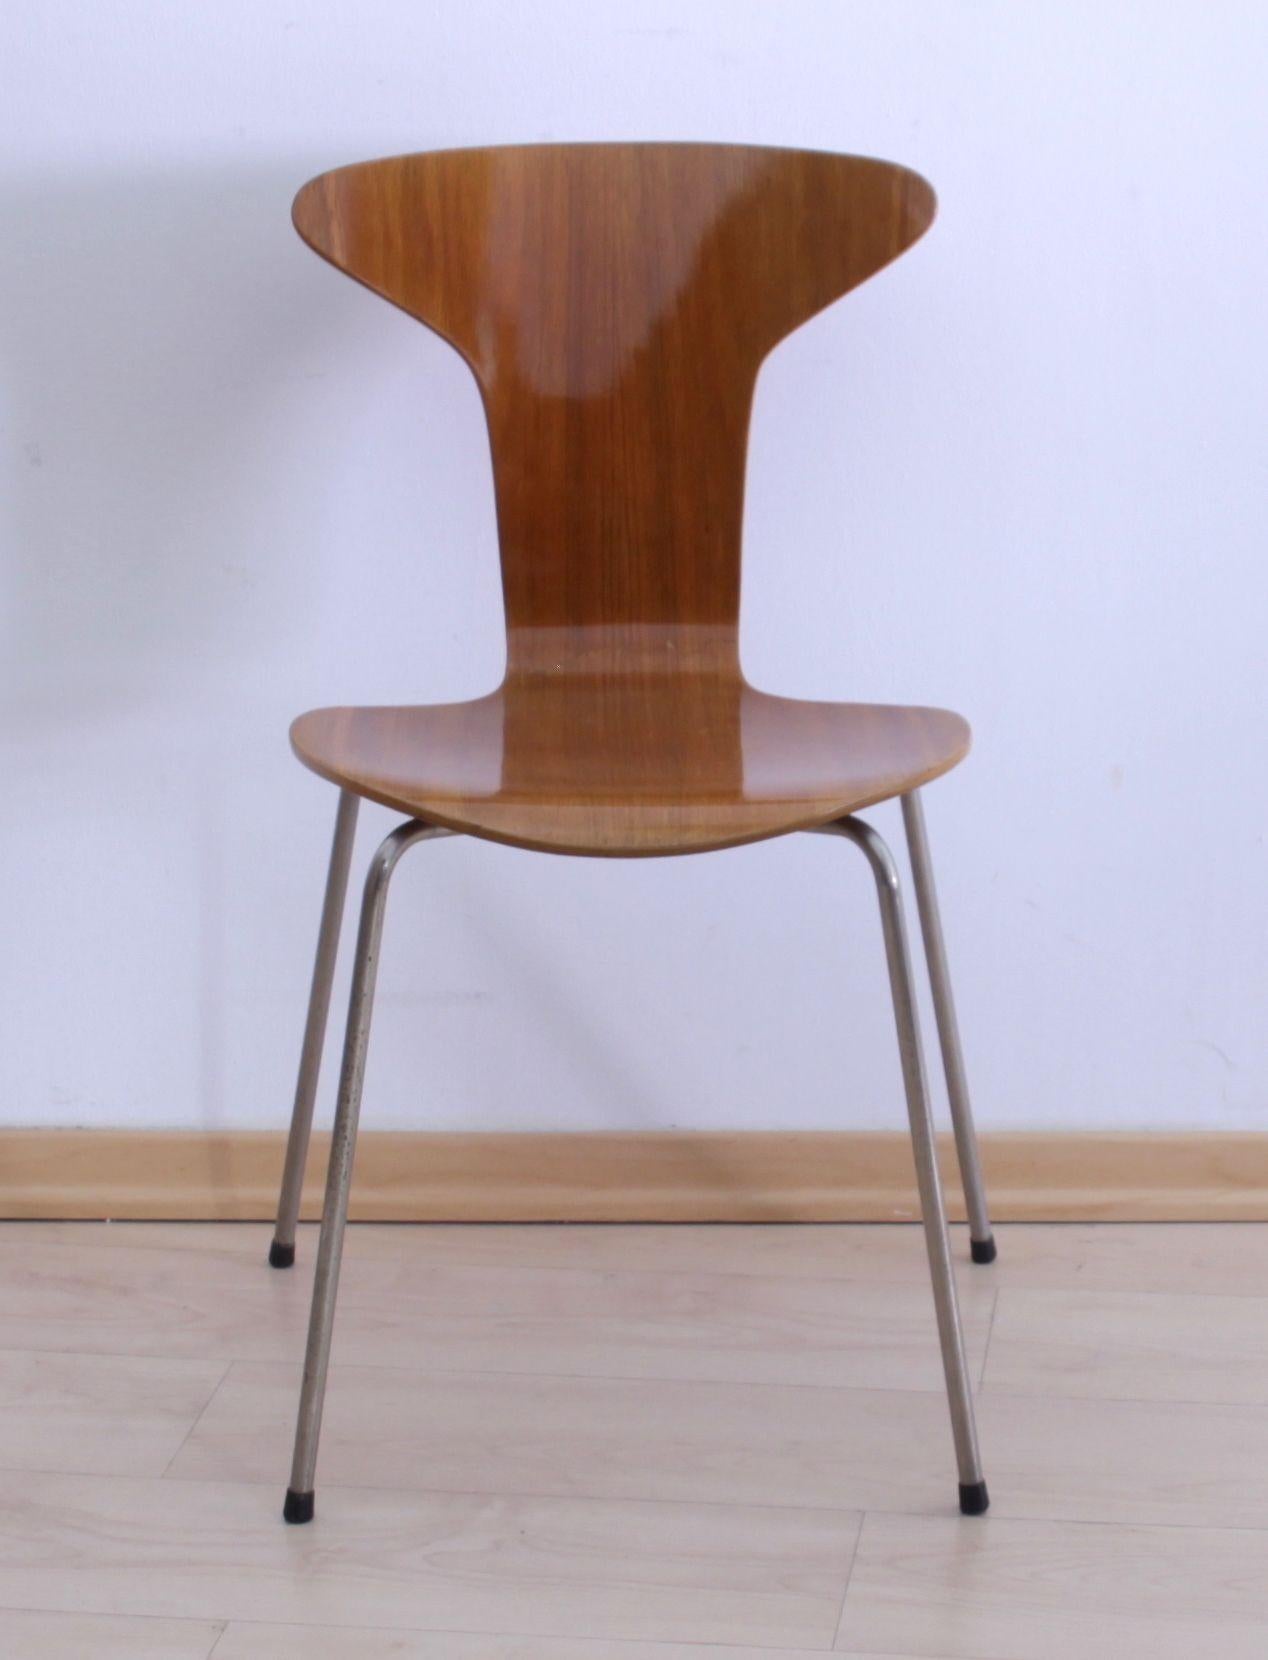 Original pair of 3105 'Mosquito' or ‚Munkegard’ chairs by Arne Jacobsen for Fritz Hansen.
 
Teak veneered on curved laminated wood. Tubular steel legs with rubber caps. Old polished finish.
Designed by Arne Jacobsen in 1952 for the Munkegaard